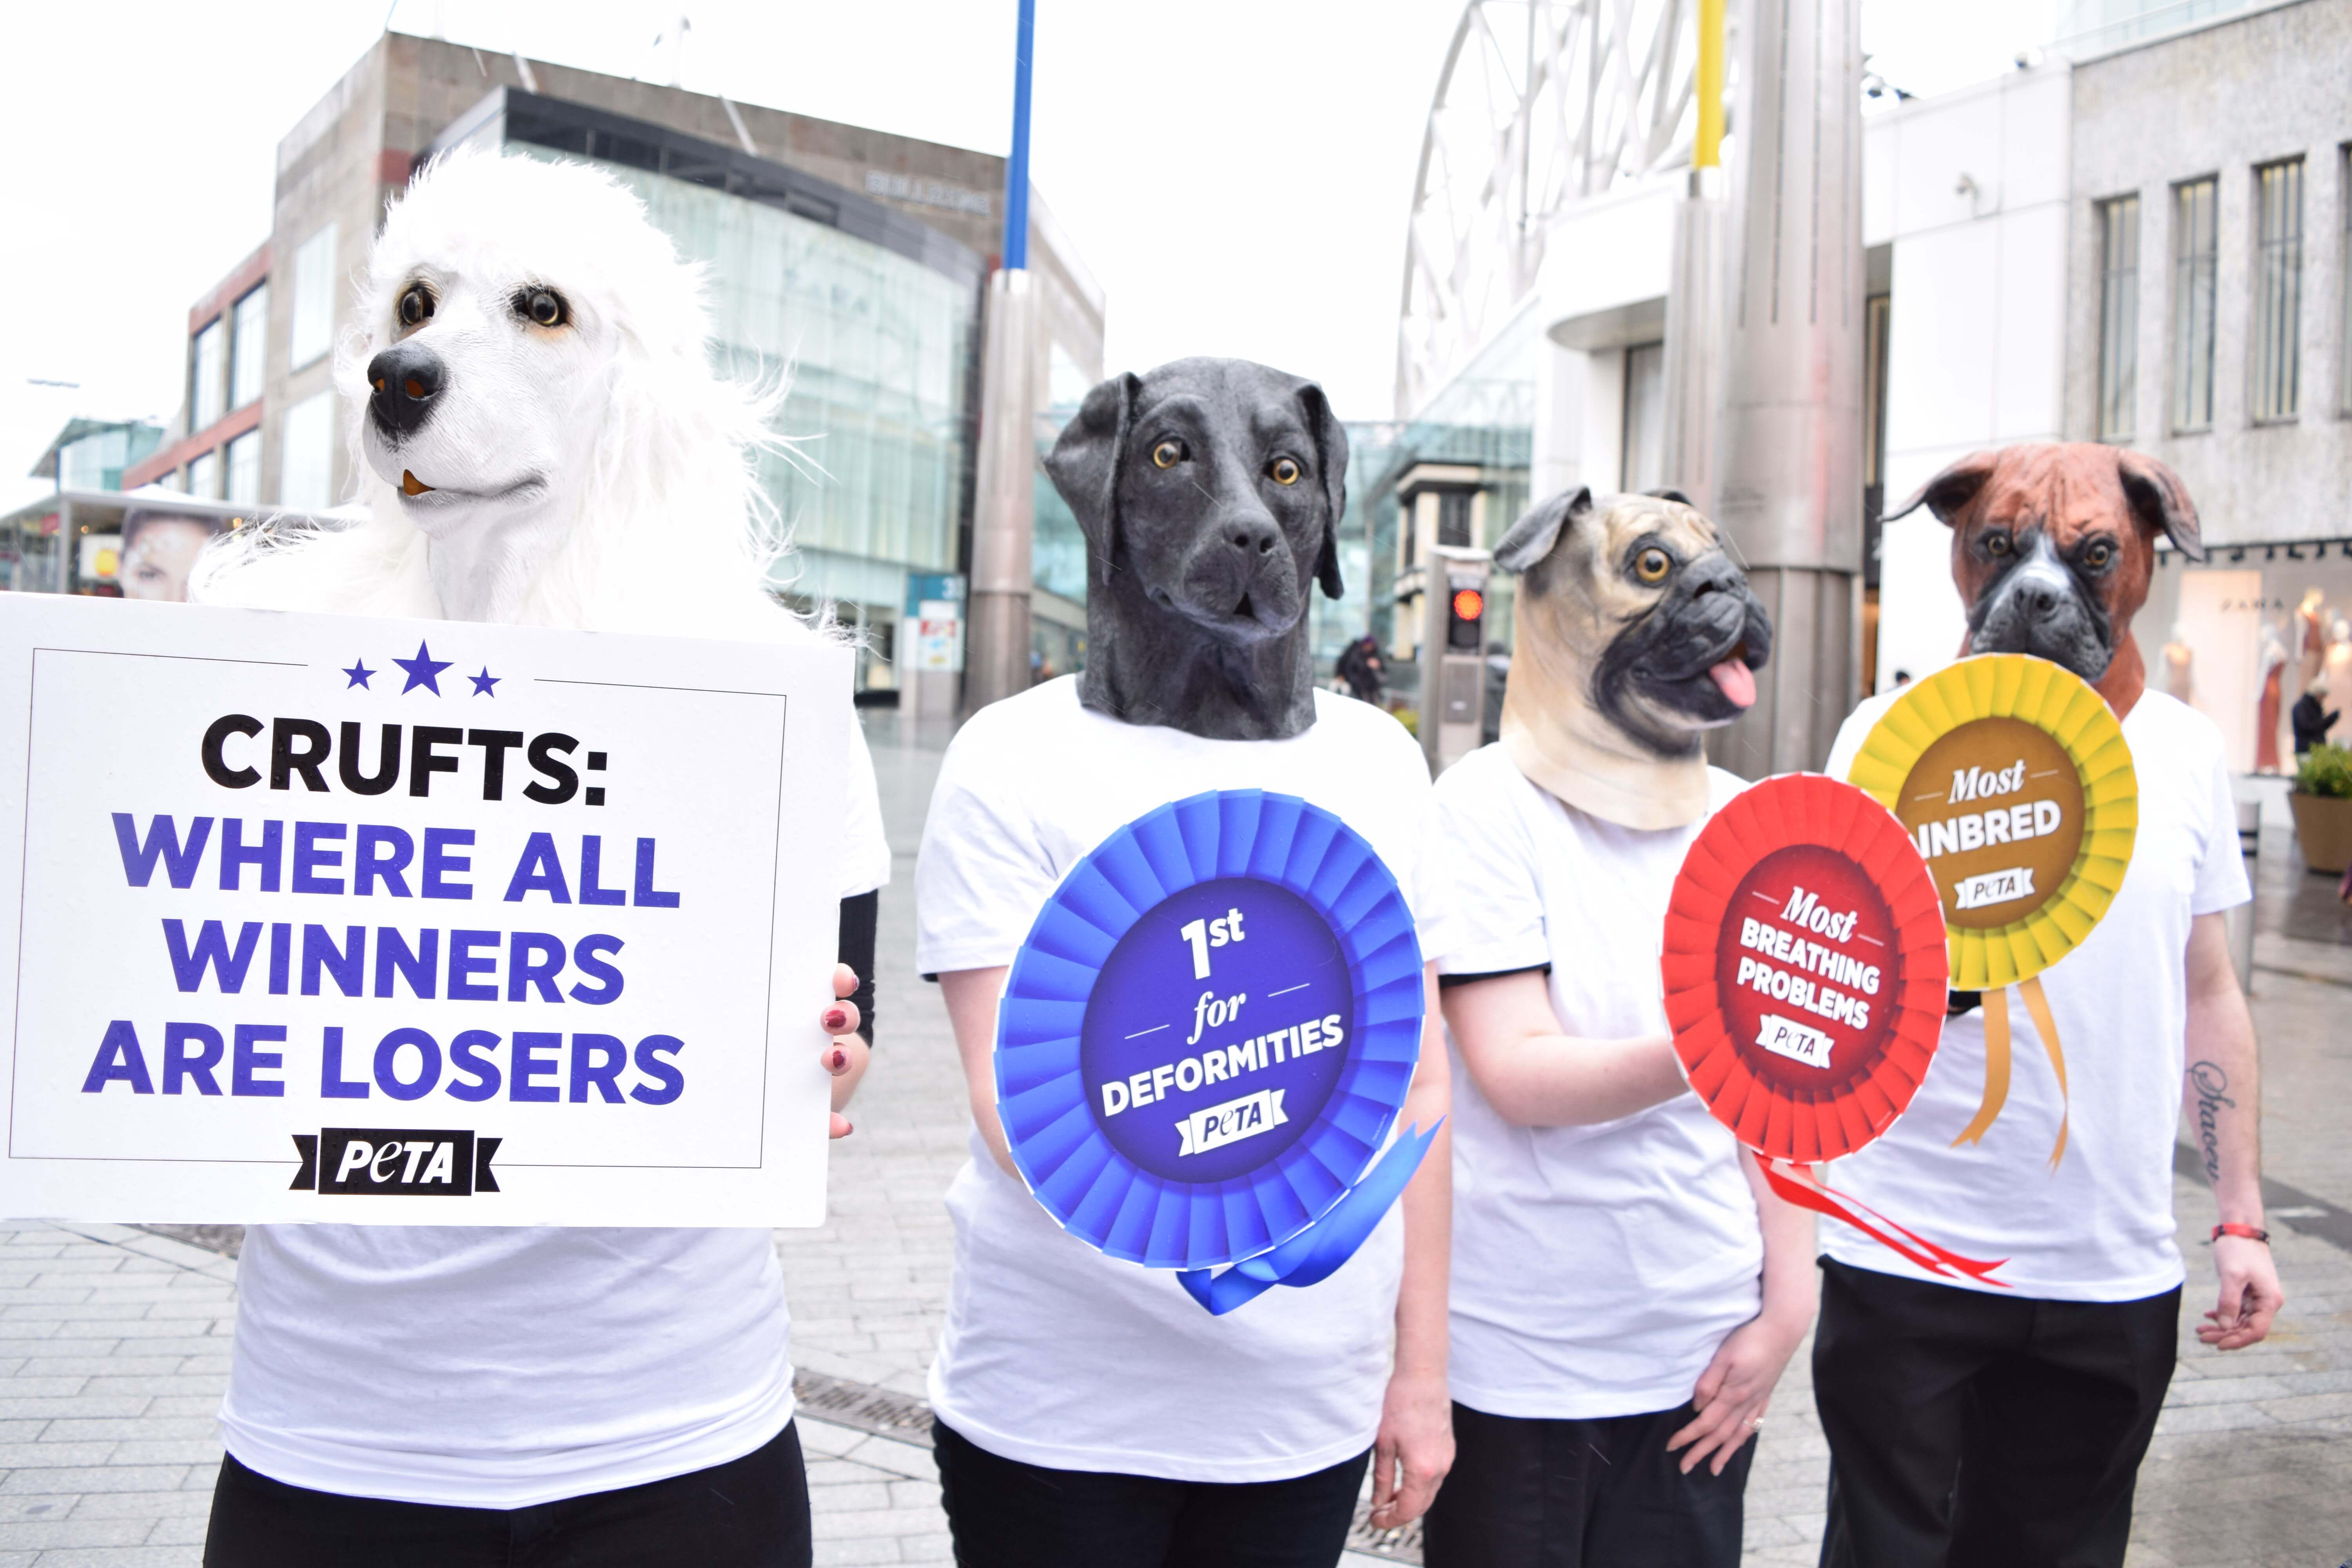 Photos 'Dogs' Protest Crufts With Most Inbred And 1st For Deformities